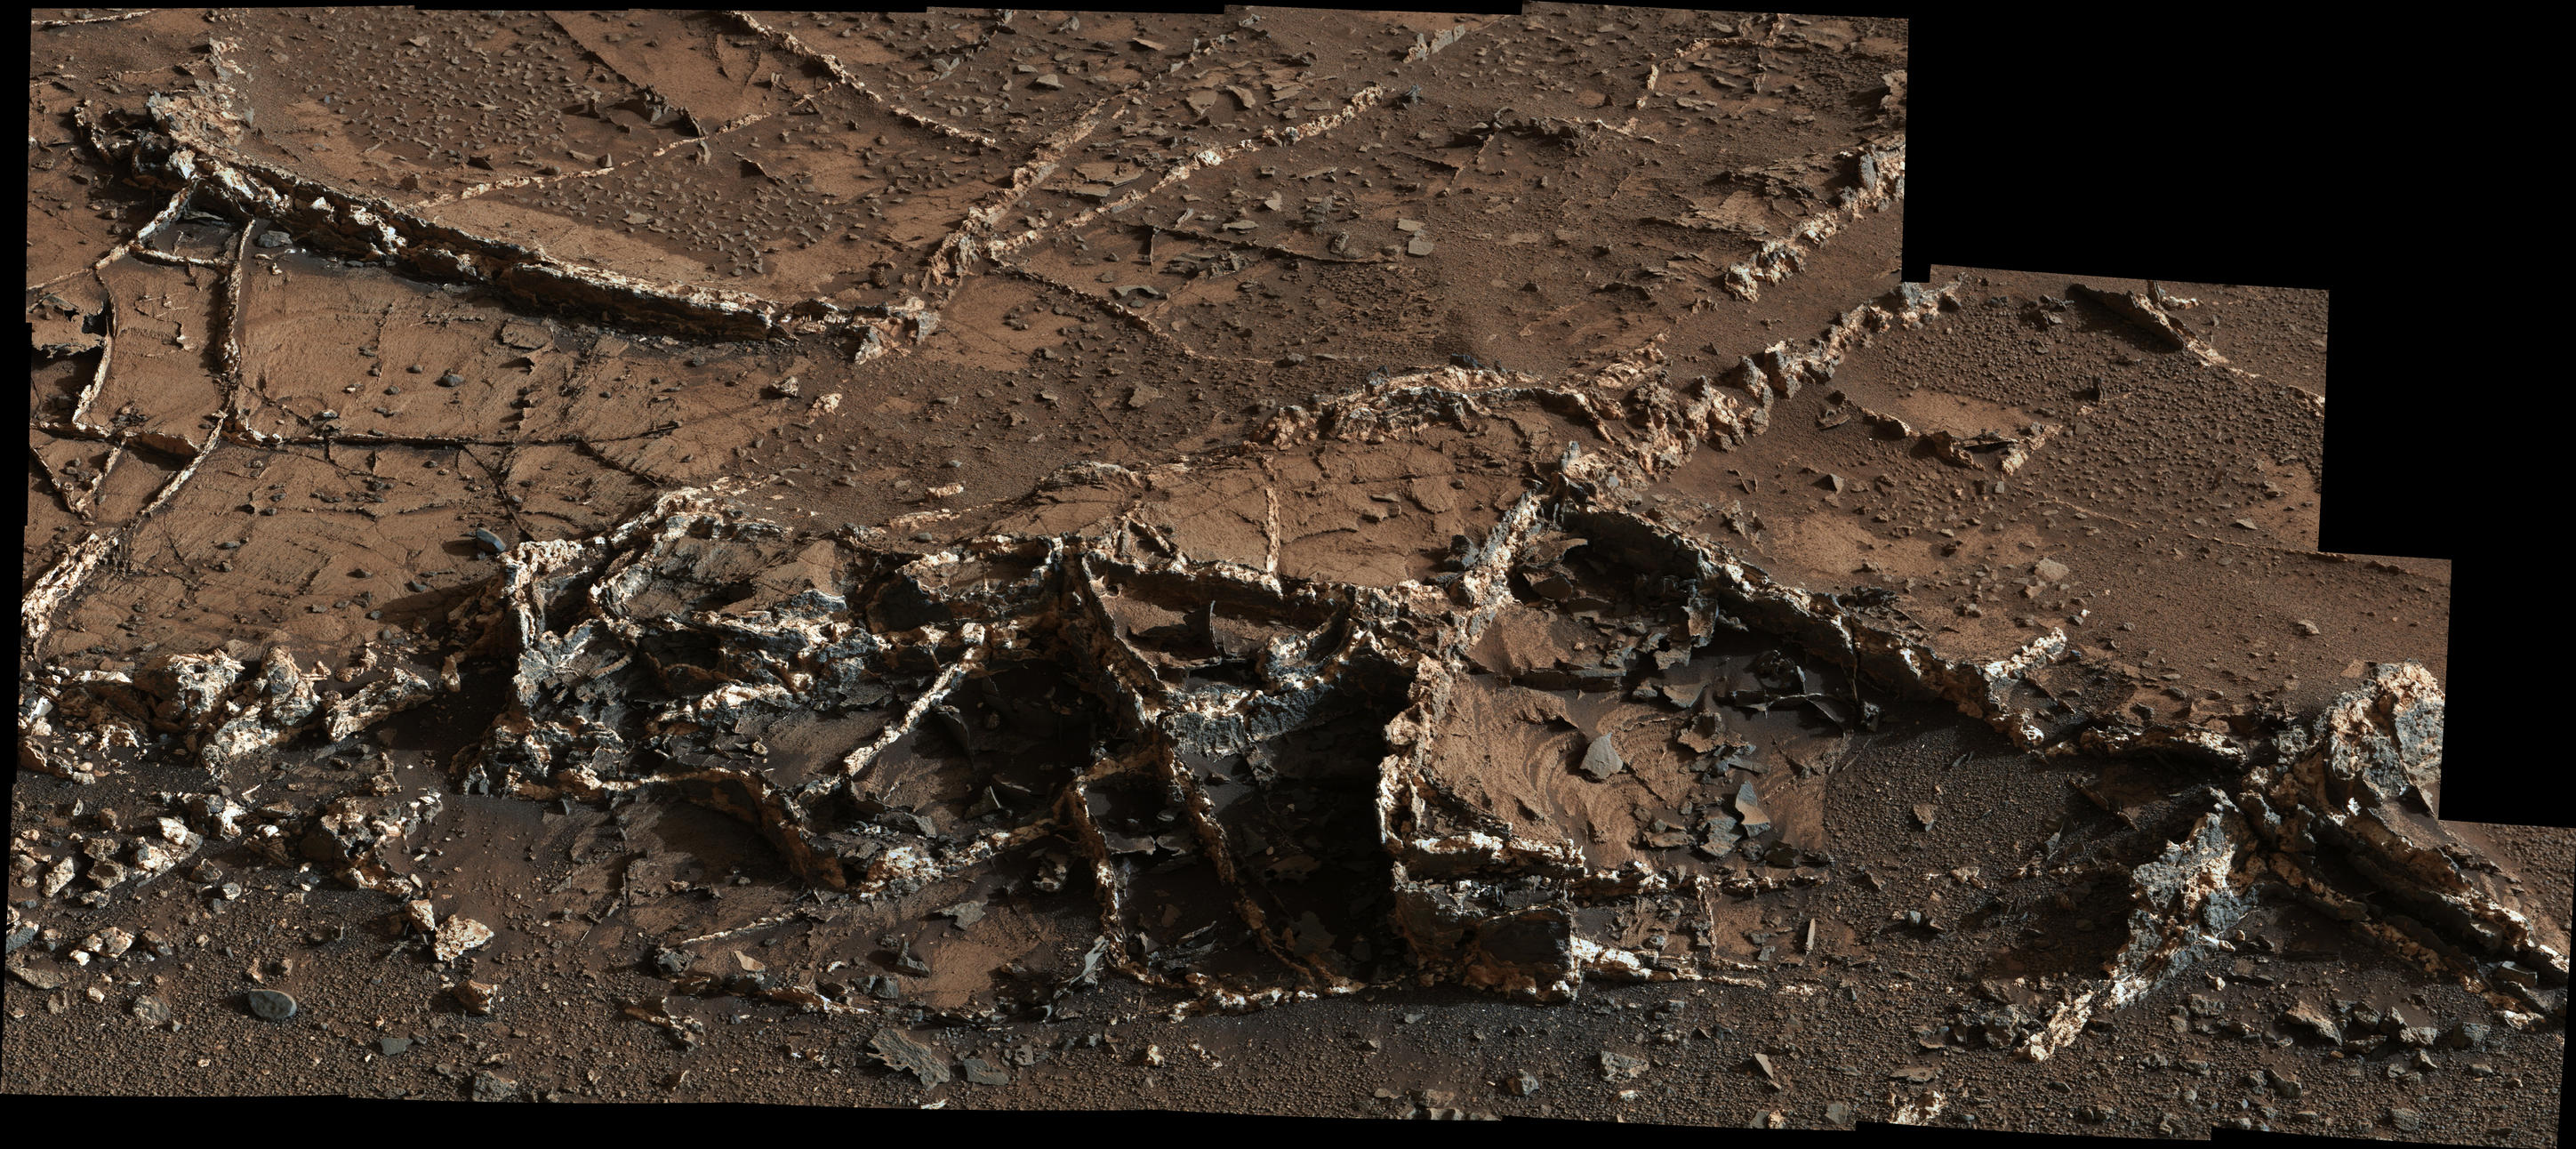 This March 18, 2015, view from the Mast Camera on NASA's Curiosity Mars rover shows a network of two-tone mineral veins at an area called "Garden City" on lower Mount Sharp.